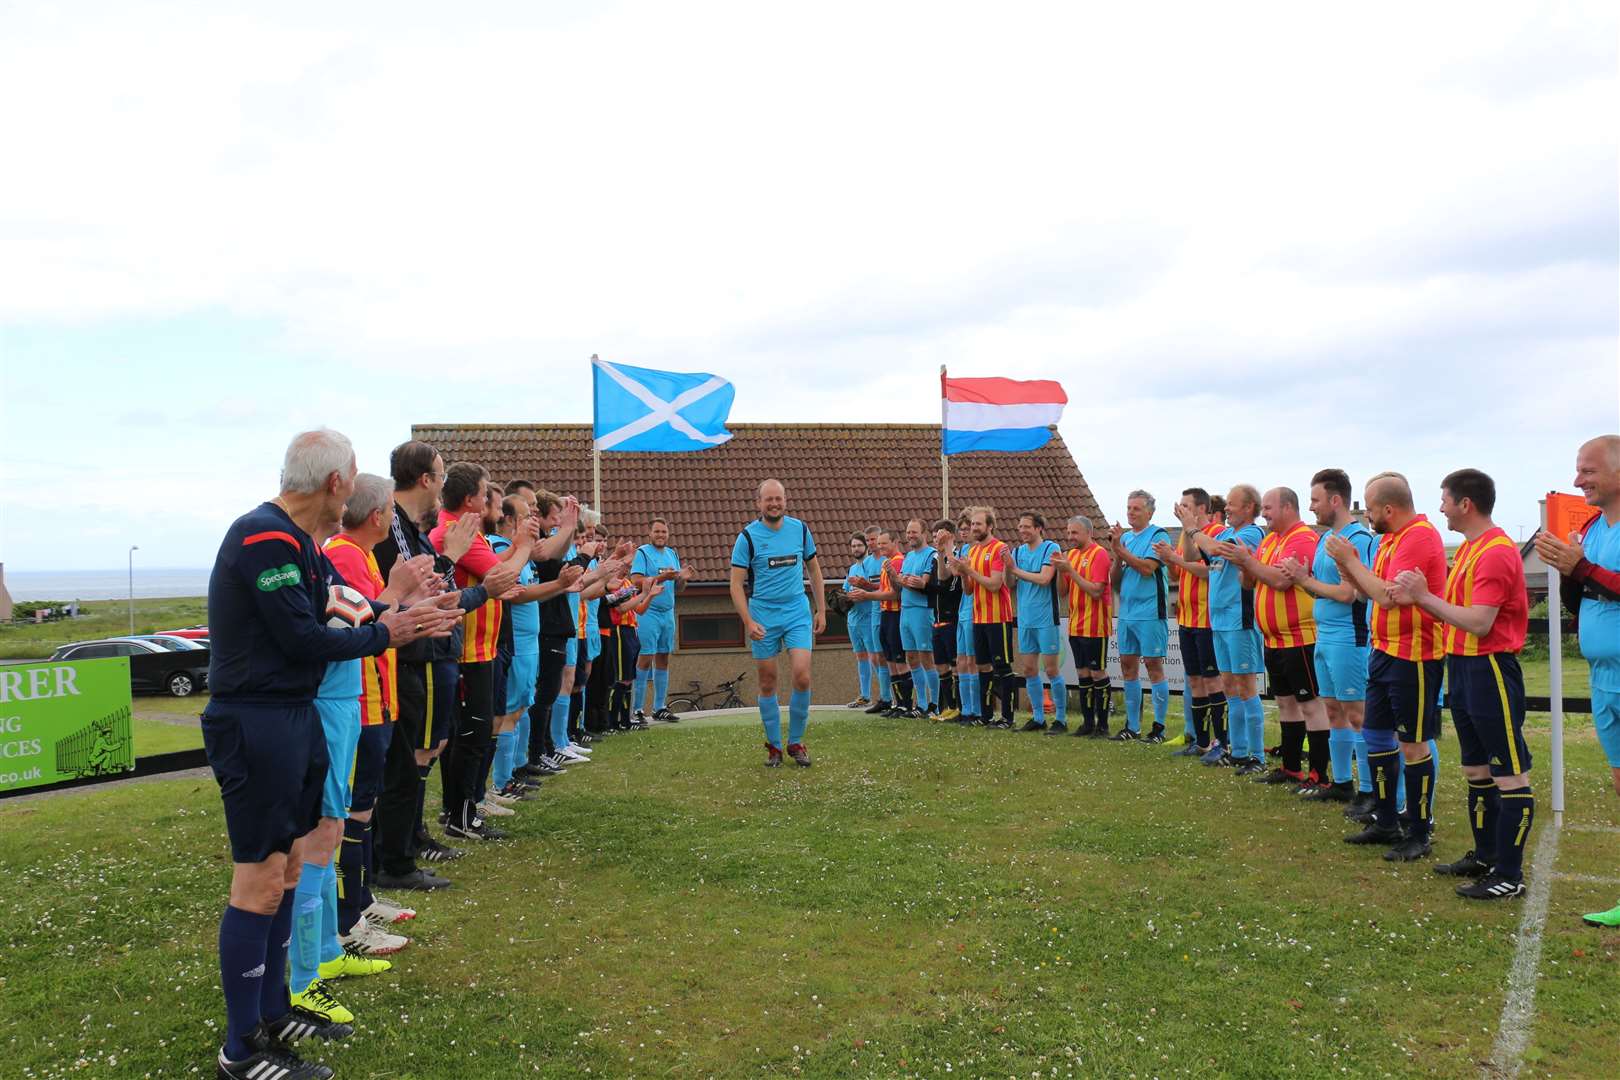 A guard of honour at Folke Park for Gijs van der Poel after his groundhopping trek from Land's End to John O'Groats.